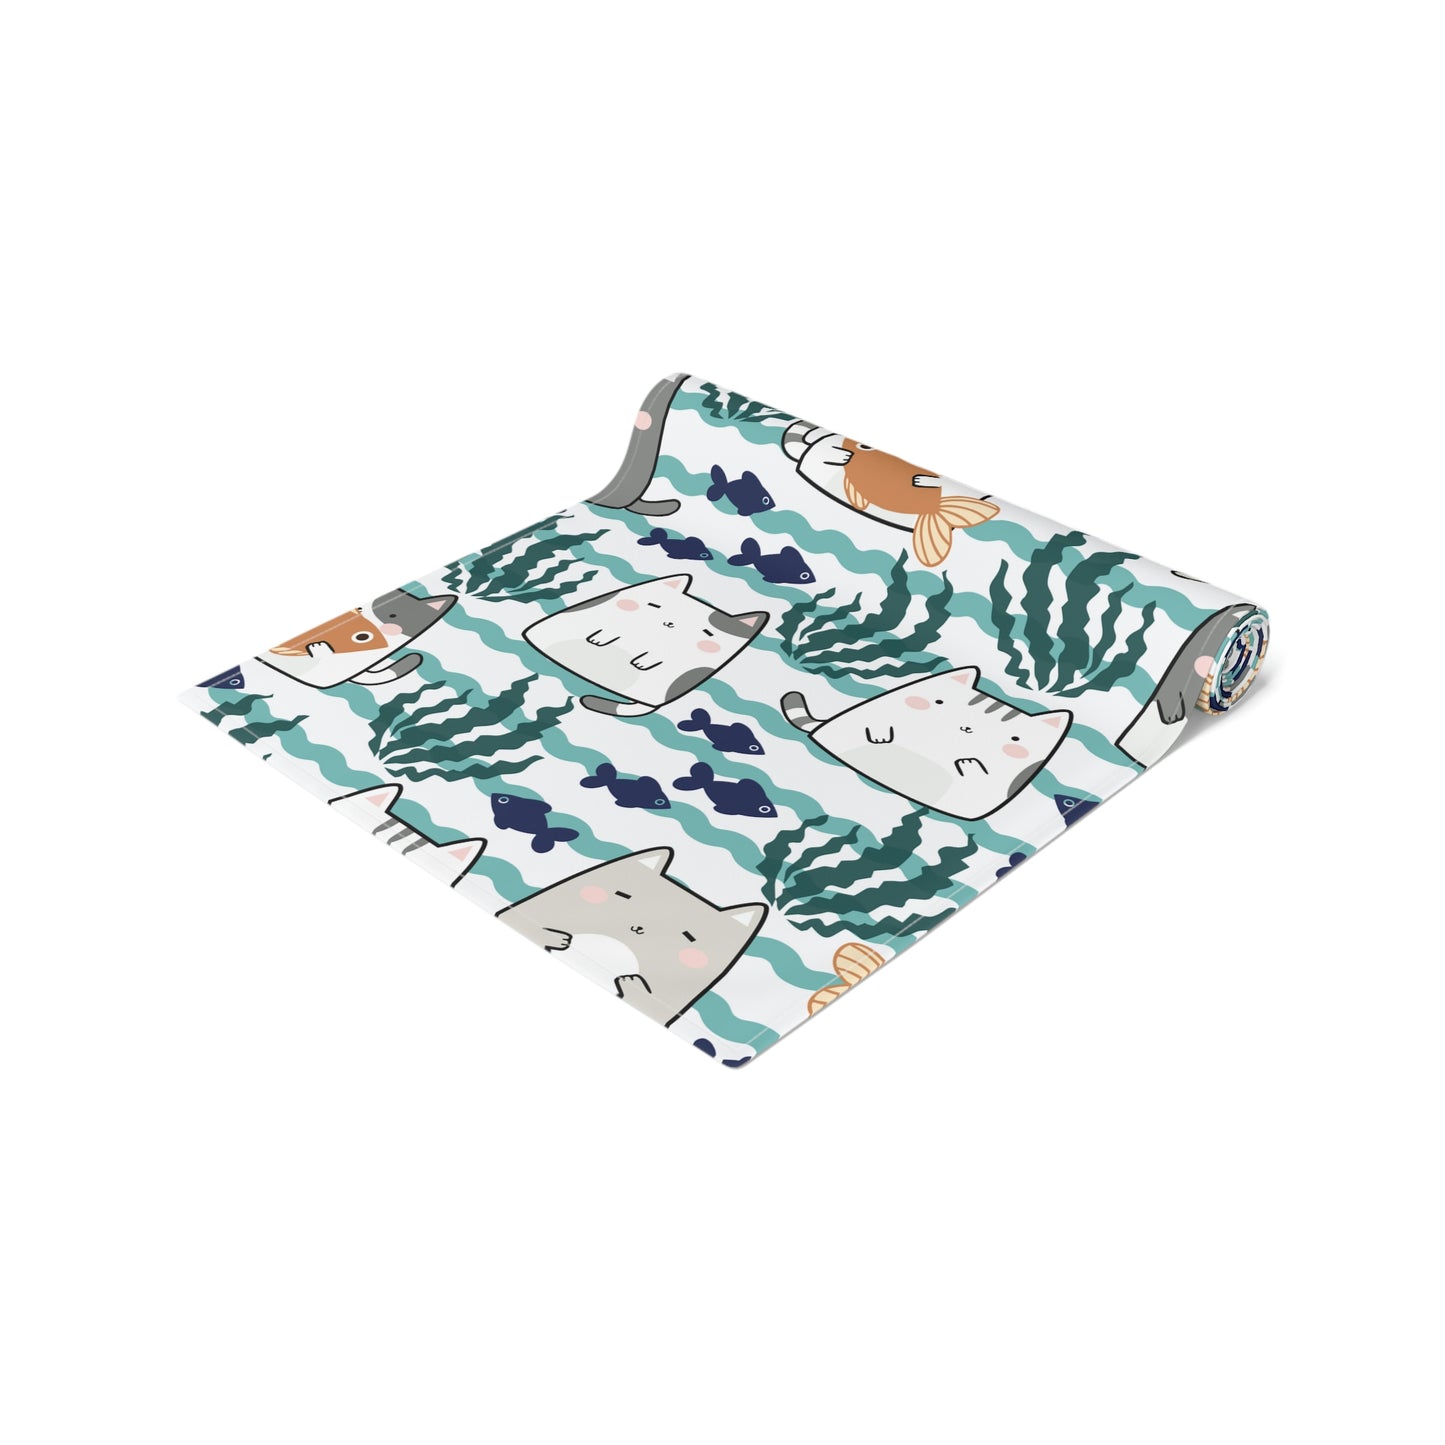 Kawaii Cats and Fishes Table Runner (Cotton, Poly)